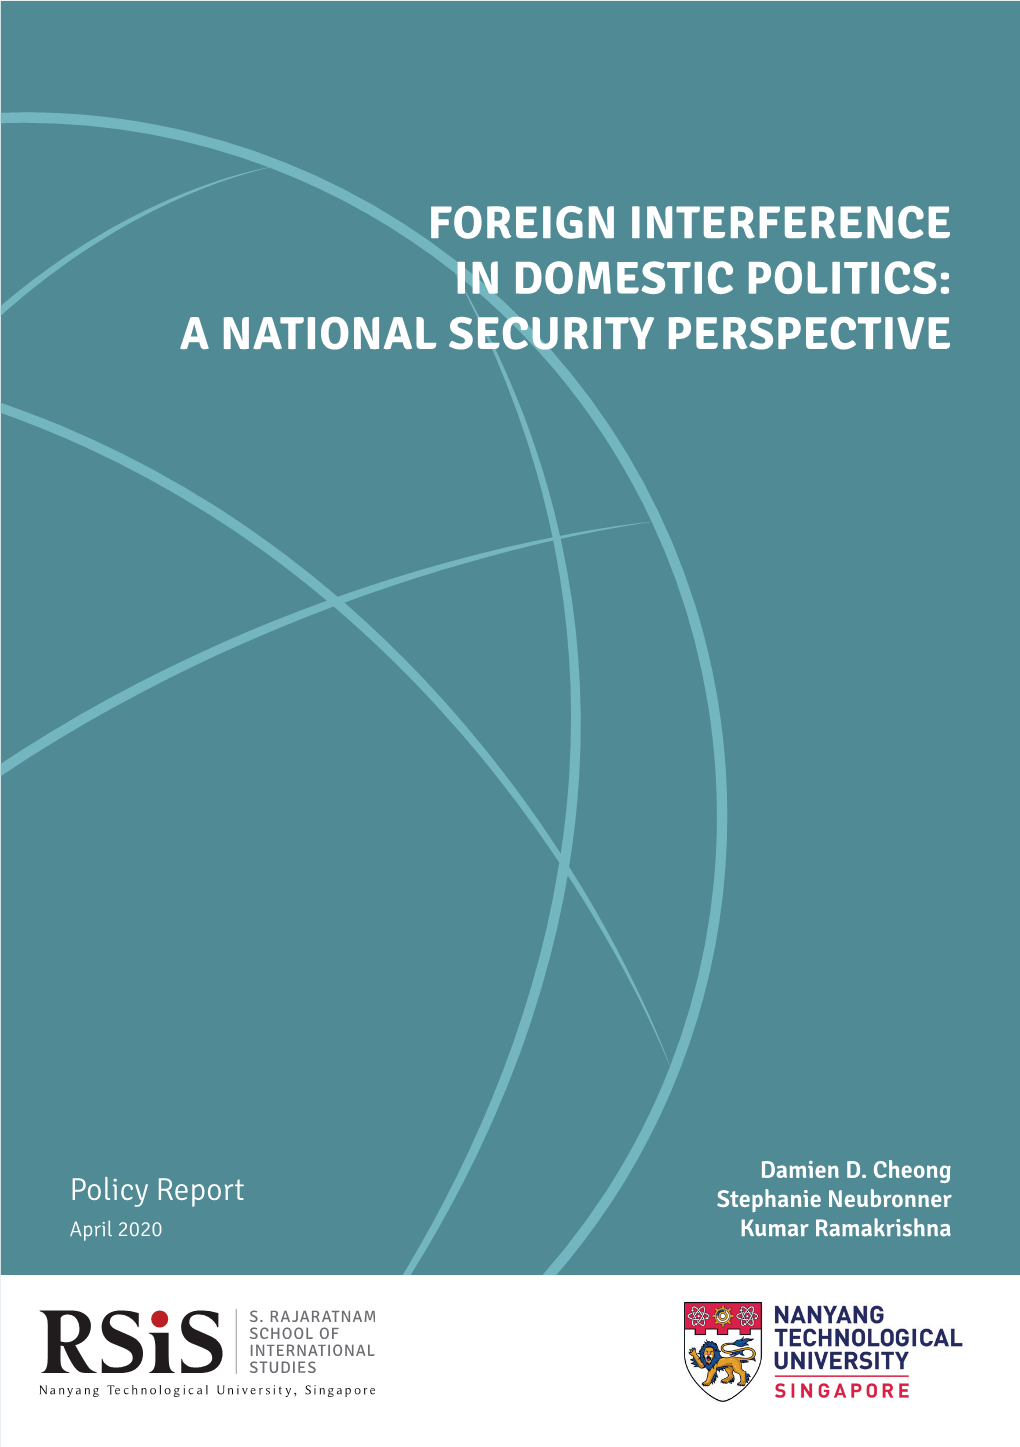 Foreign Interference in Domestic Politics: a National Security Perspective